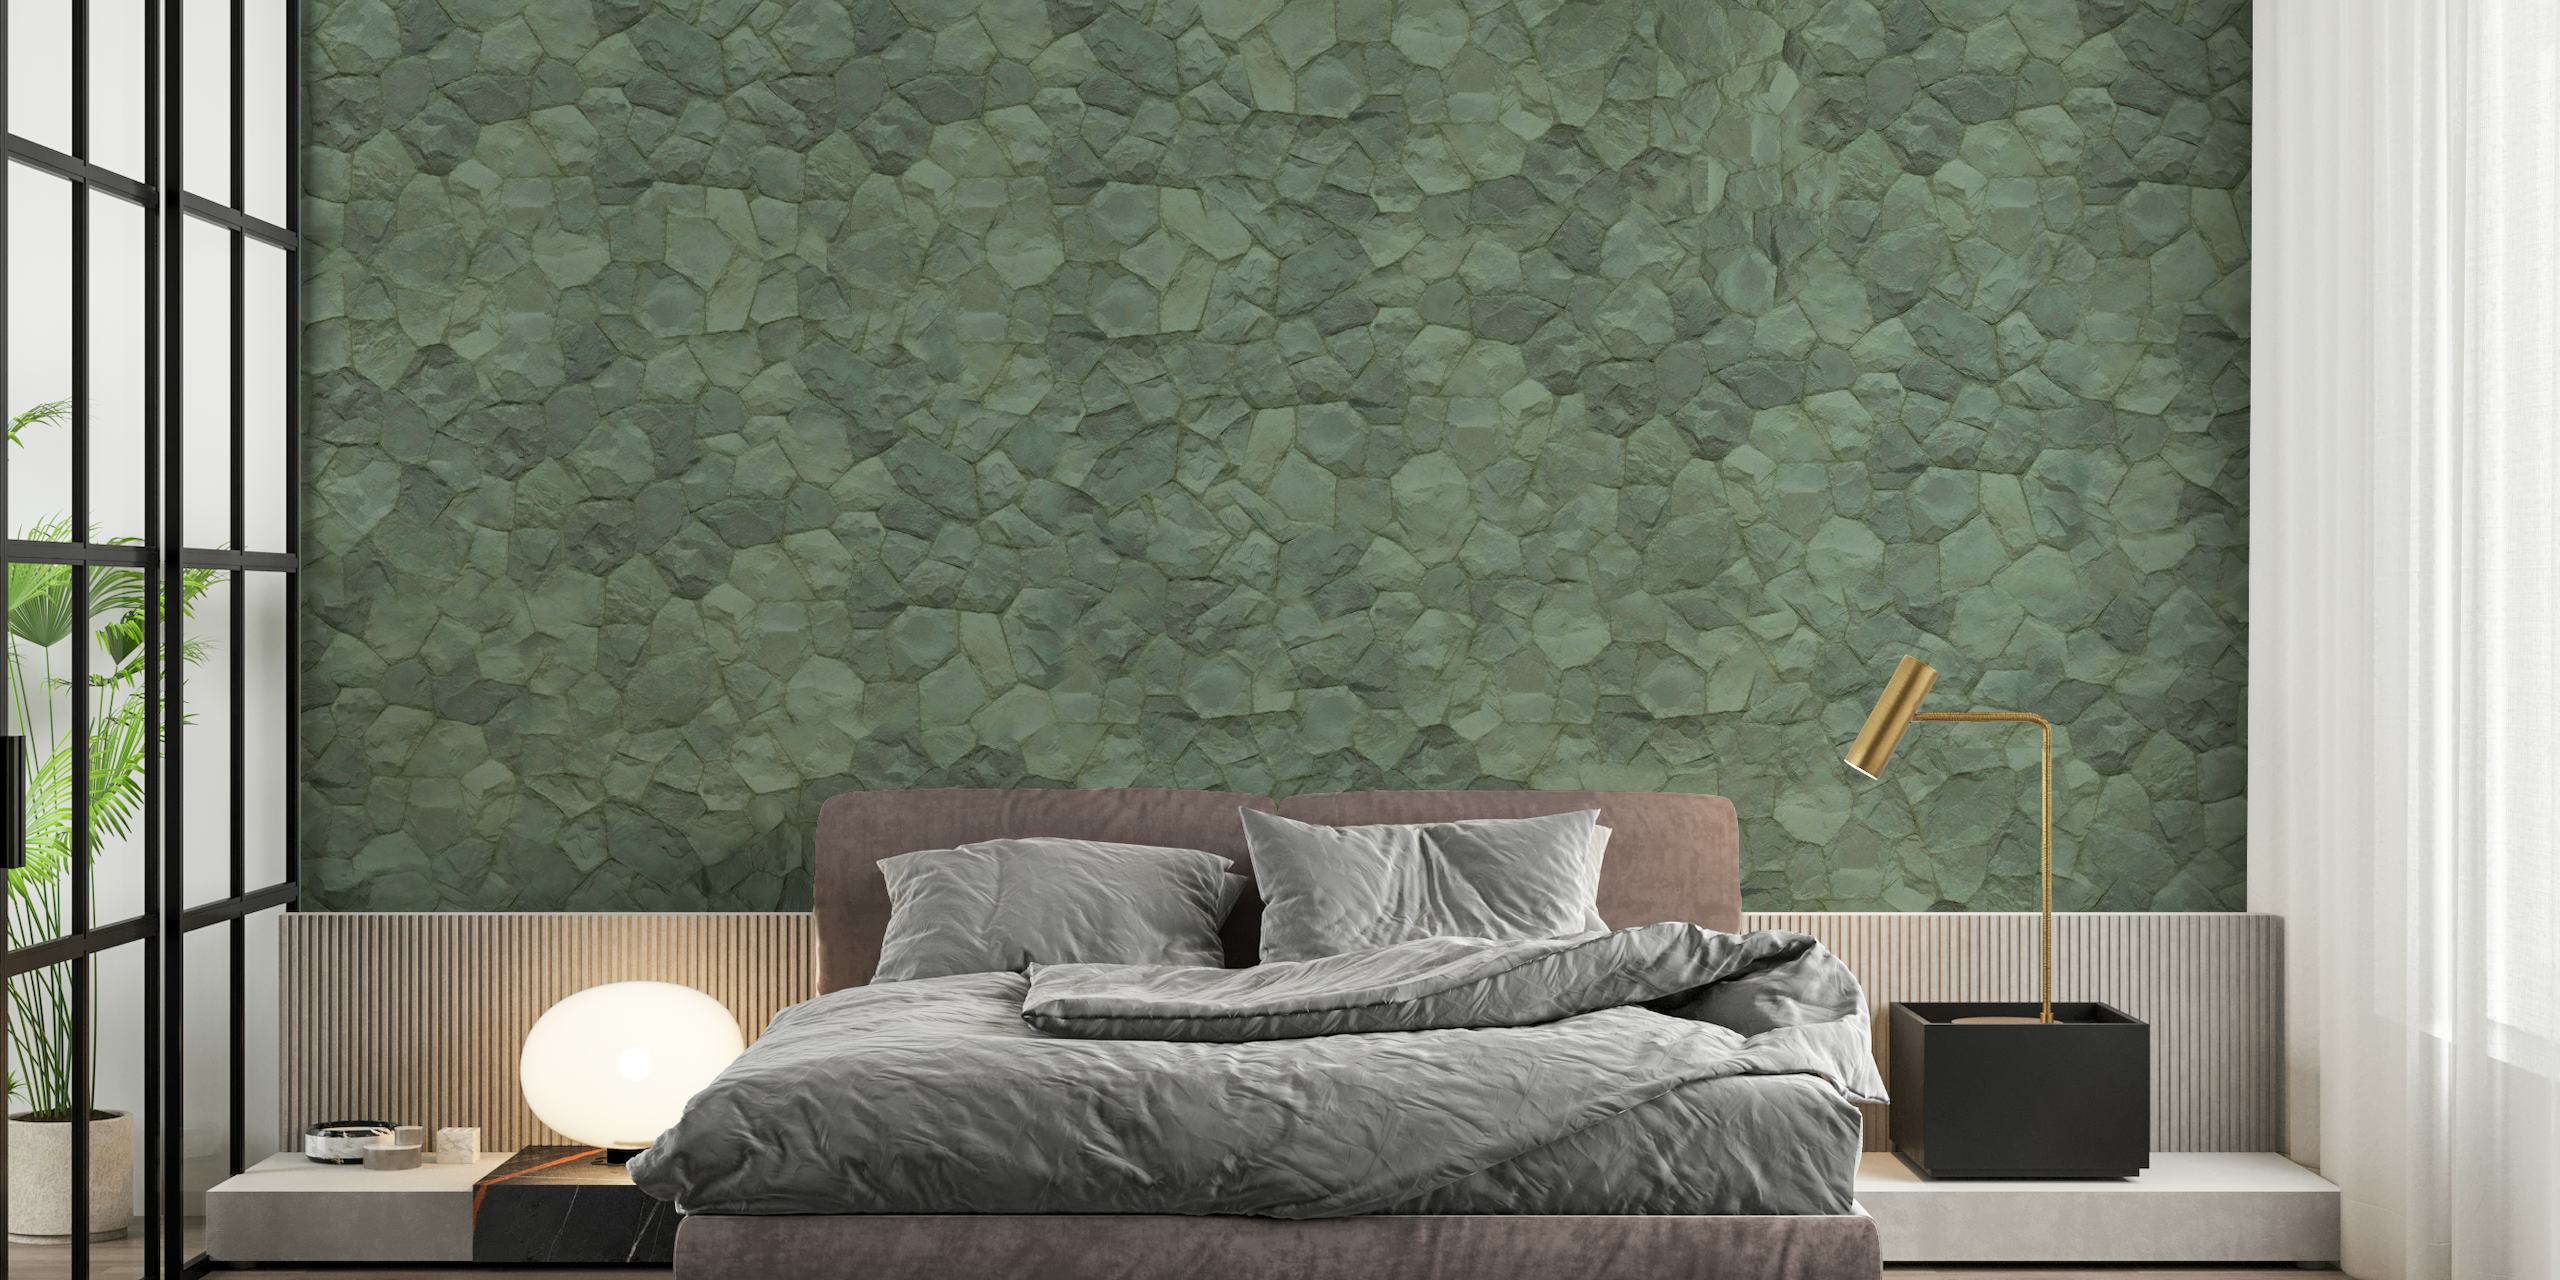 Green stone texture wall mural for serene interior ambiance